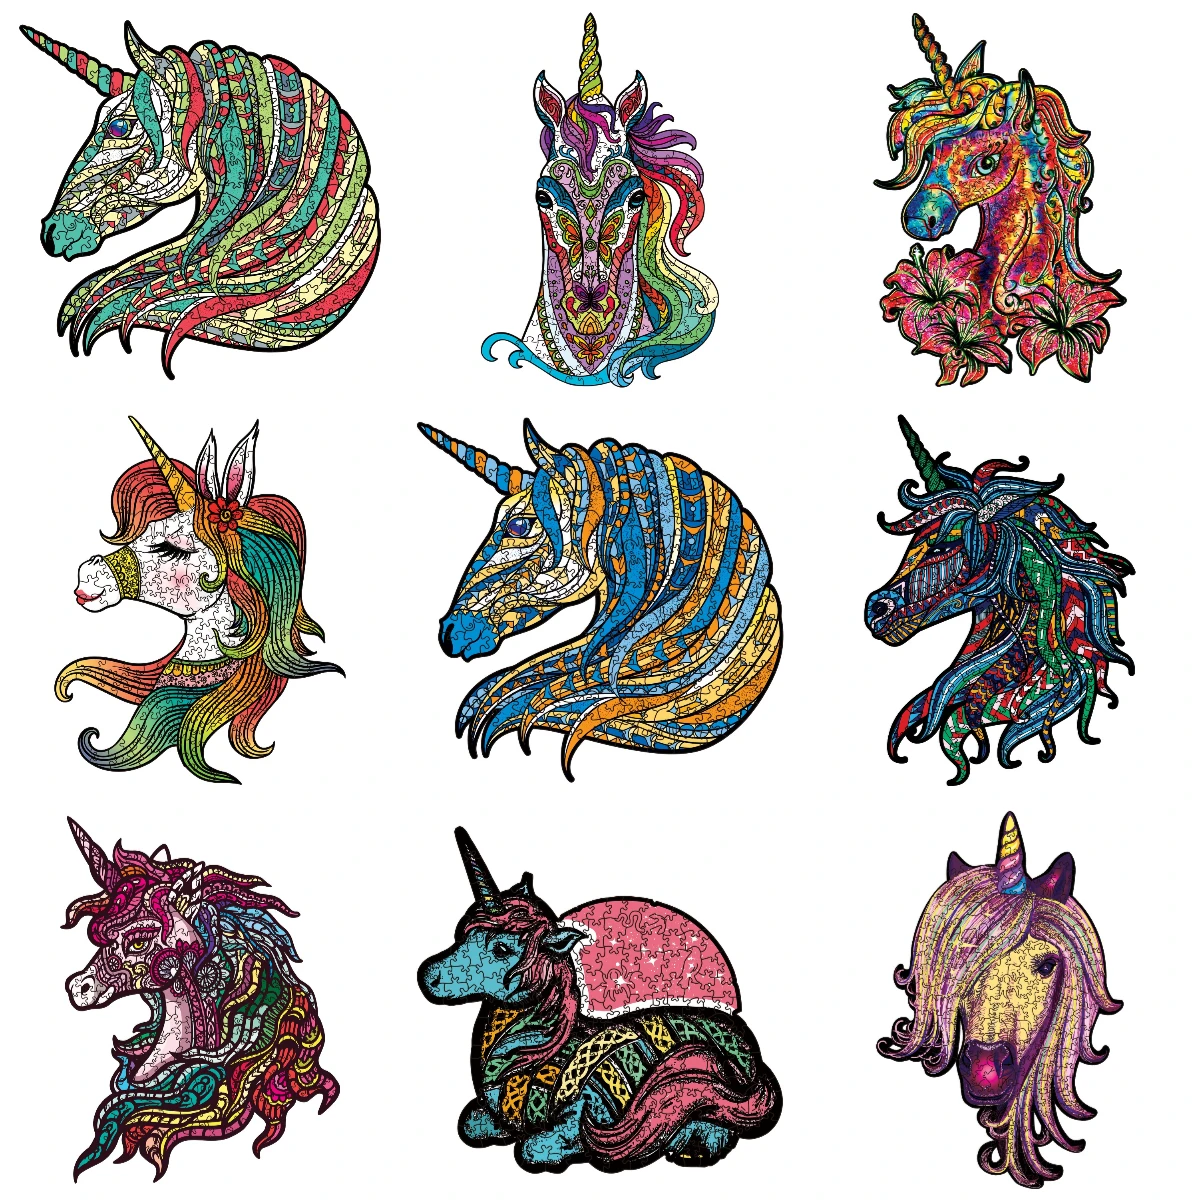 

Unicorn Wooden Puzzles Mysterious Animal 3D Puzzle Jigsaw Board Games Interactive Games Toy For Adults Kids Educational Gifts